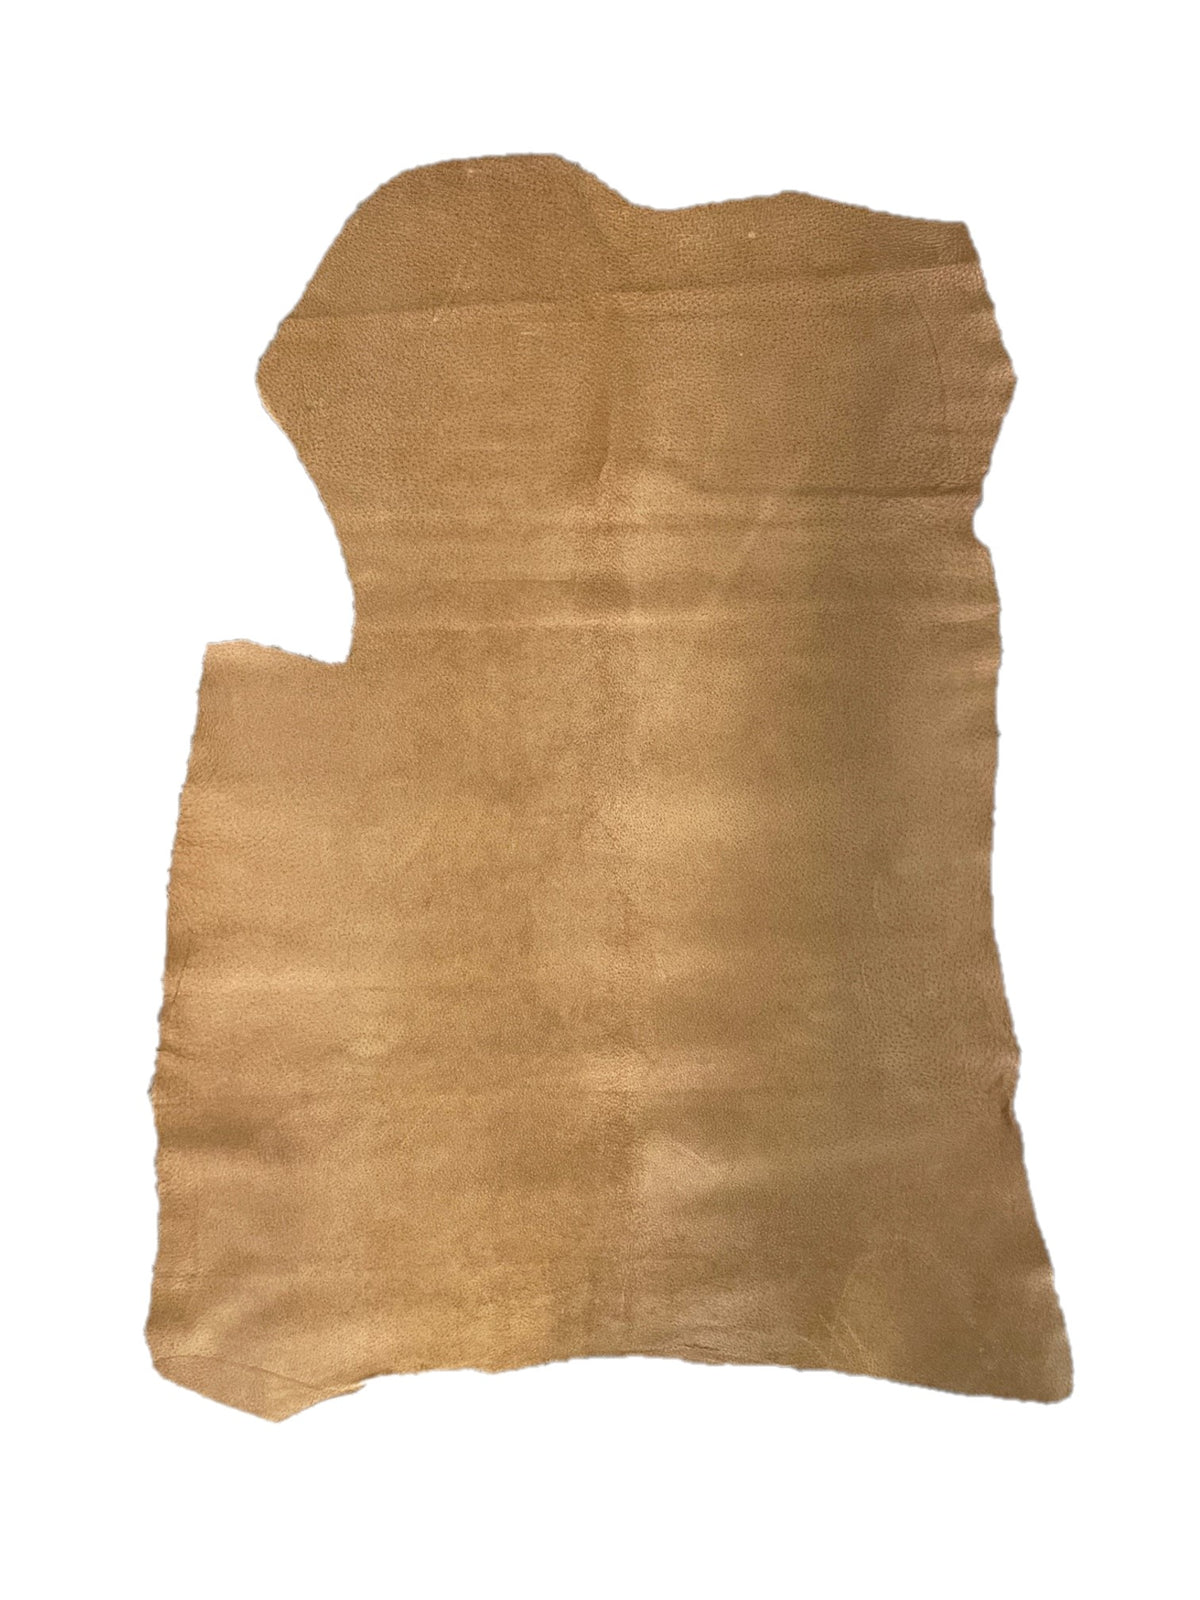 Pig Skin Suede | Camel | 0.6 mm | 8 sq.ft | From $25 ea.